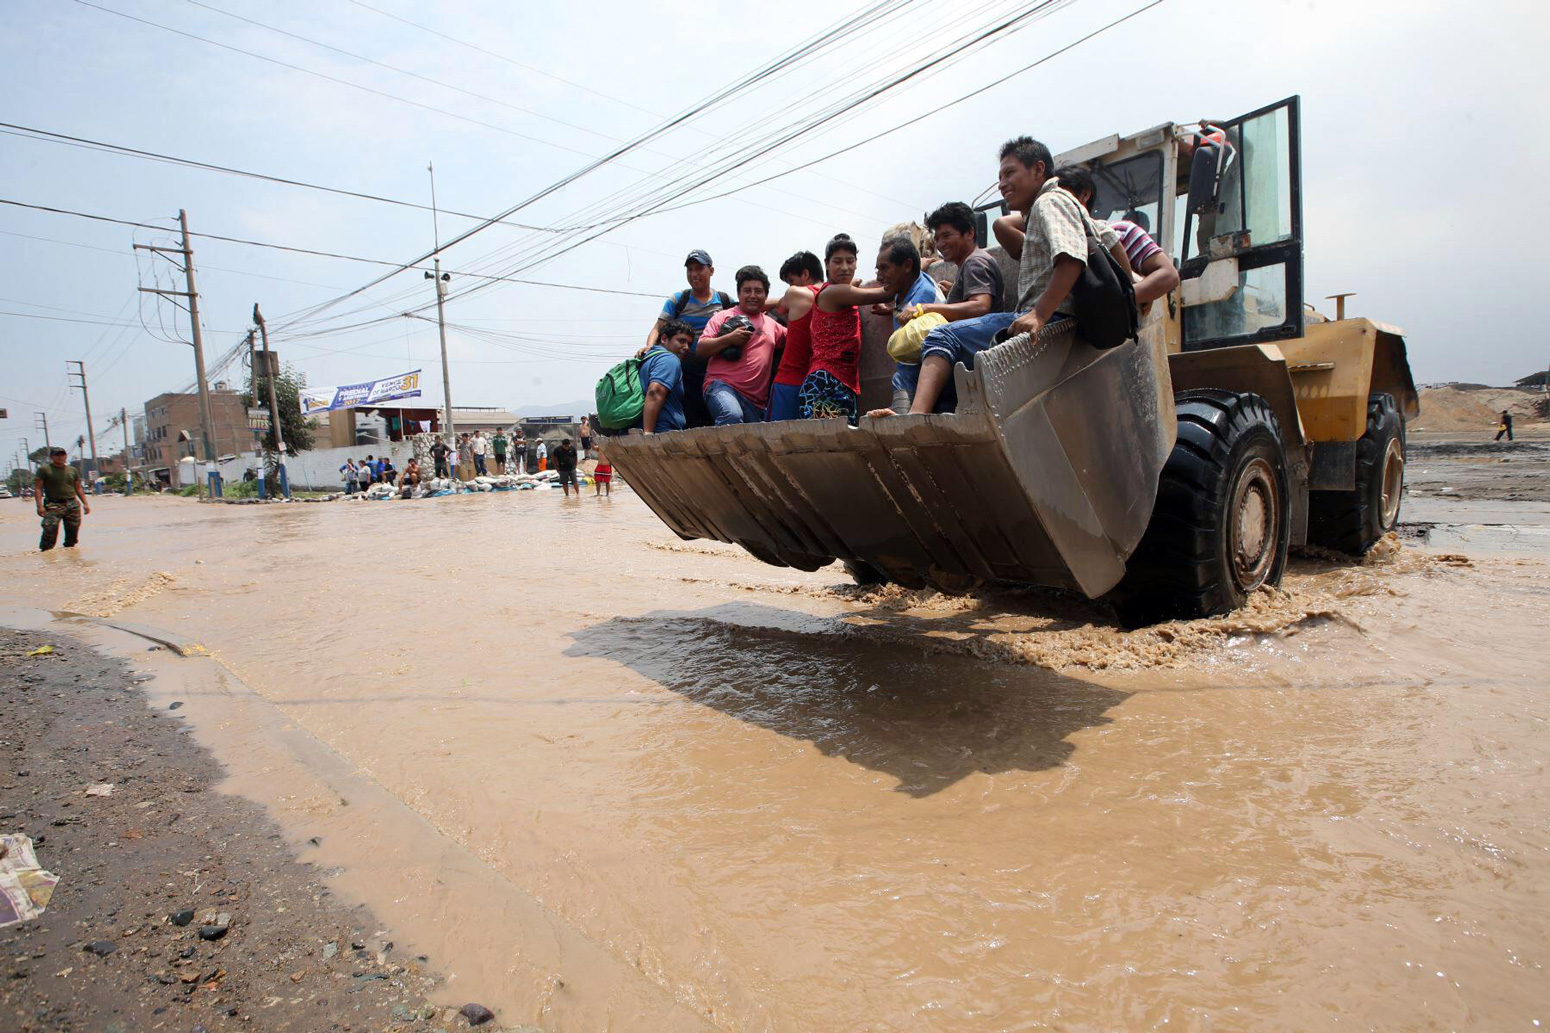 People cross a flooded road after the overflow of the Rimac river in Peru